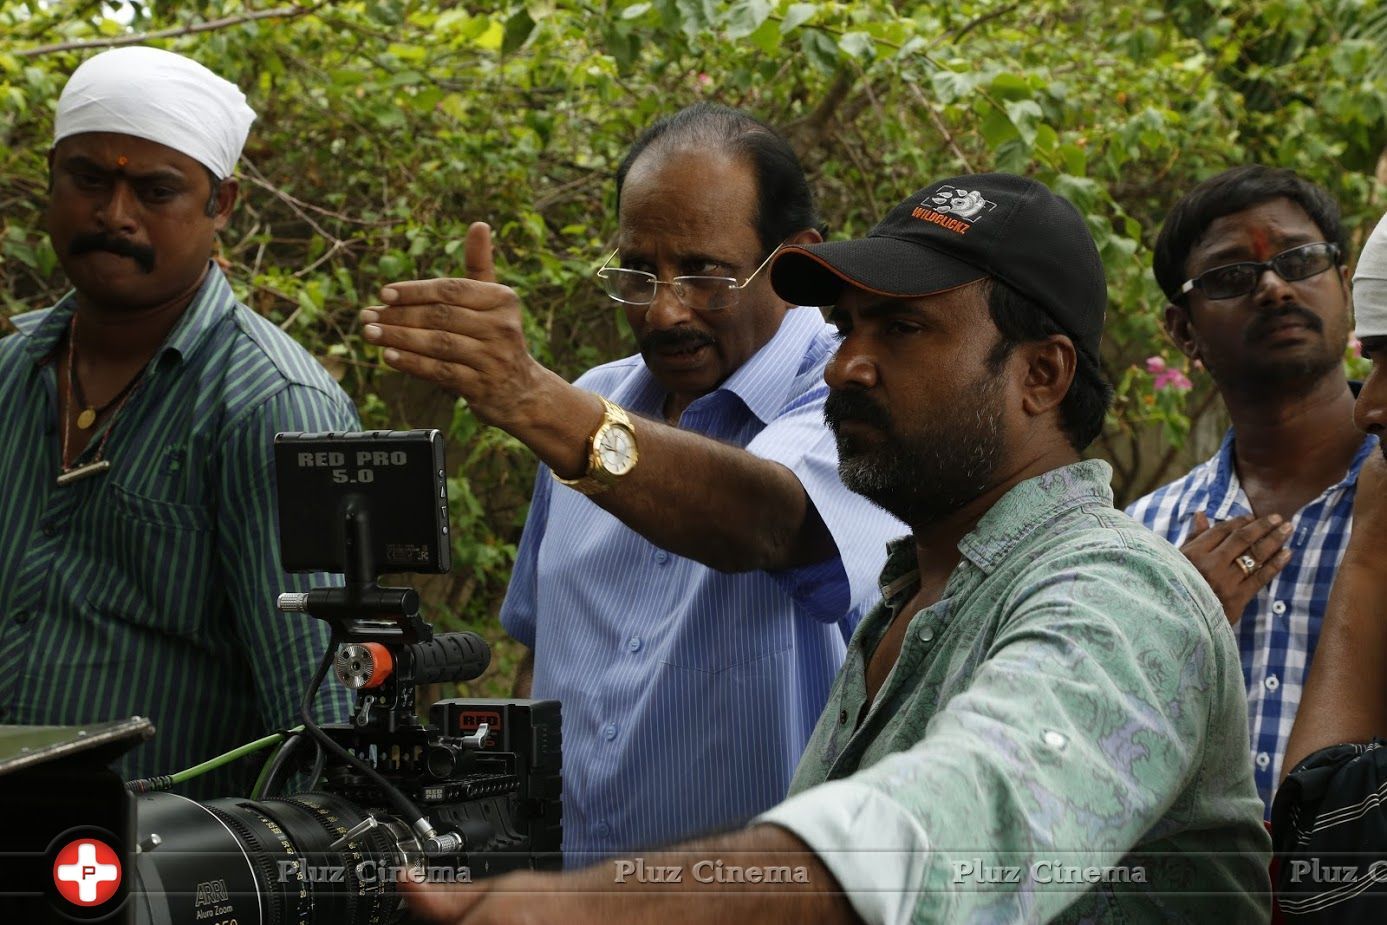 Srivalli Movie Working Photos | Picture 1457755